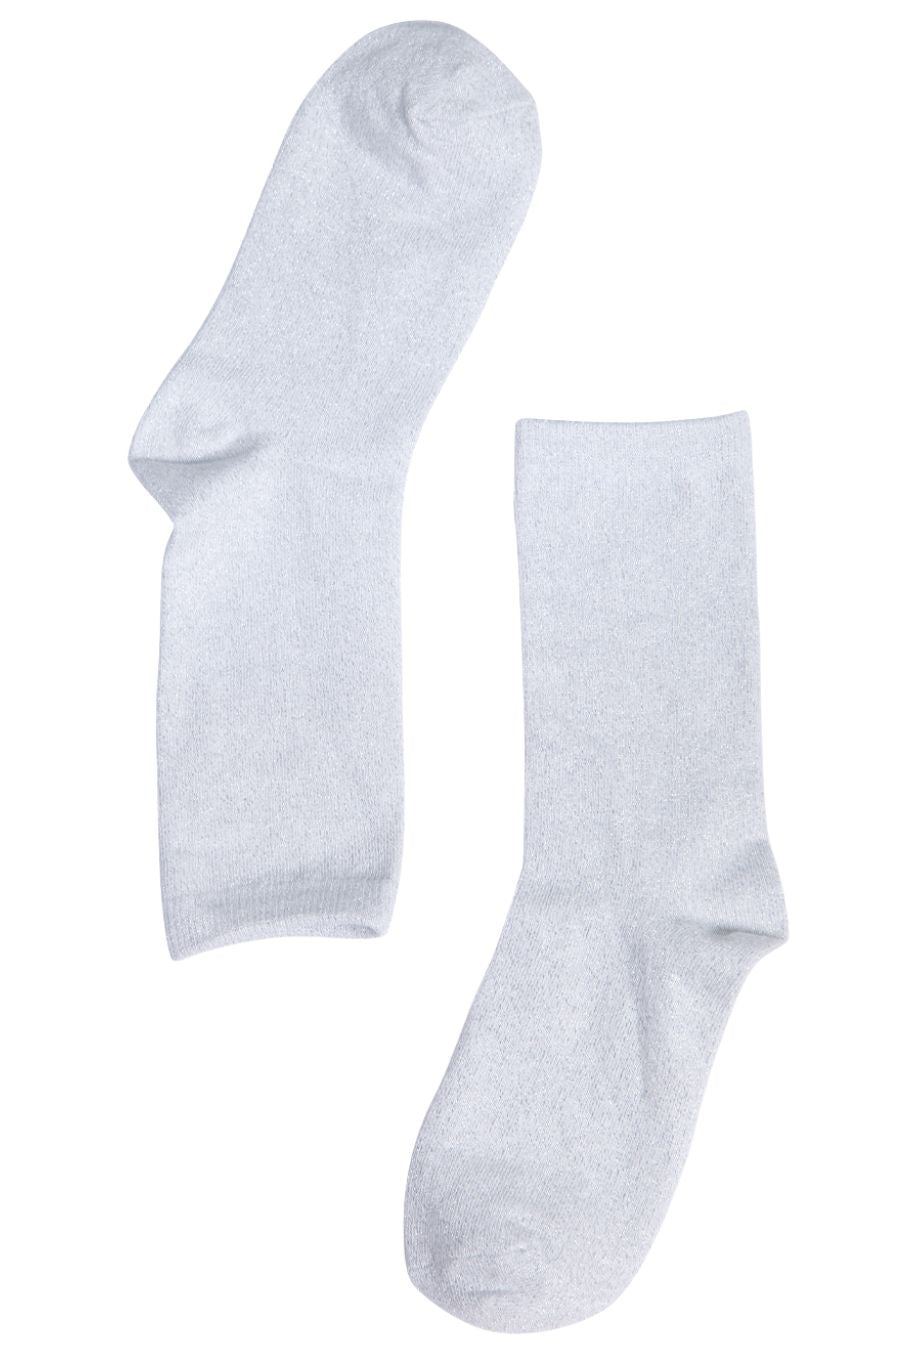 white and silver glitter ankle socks